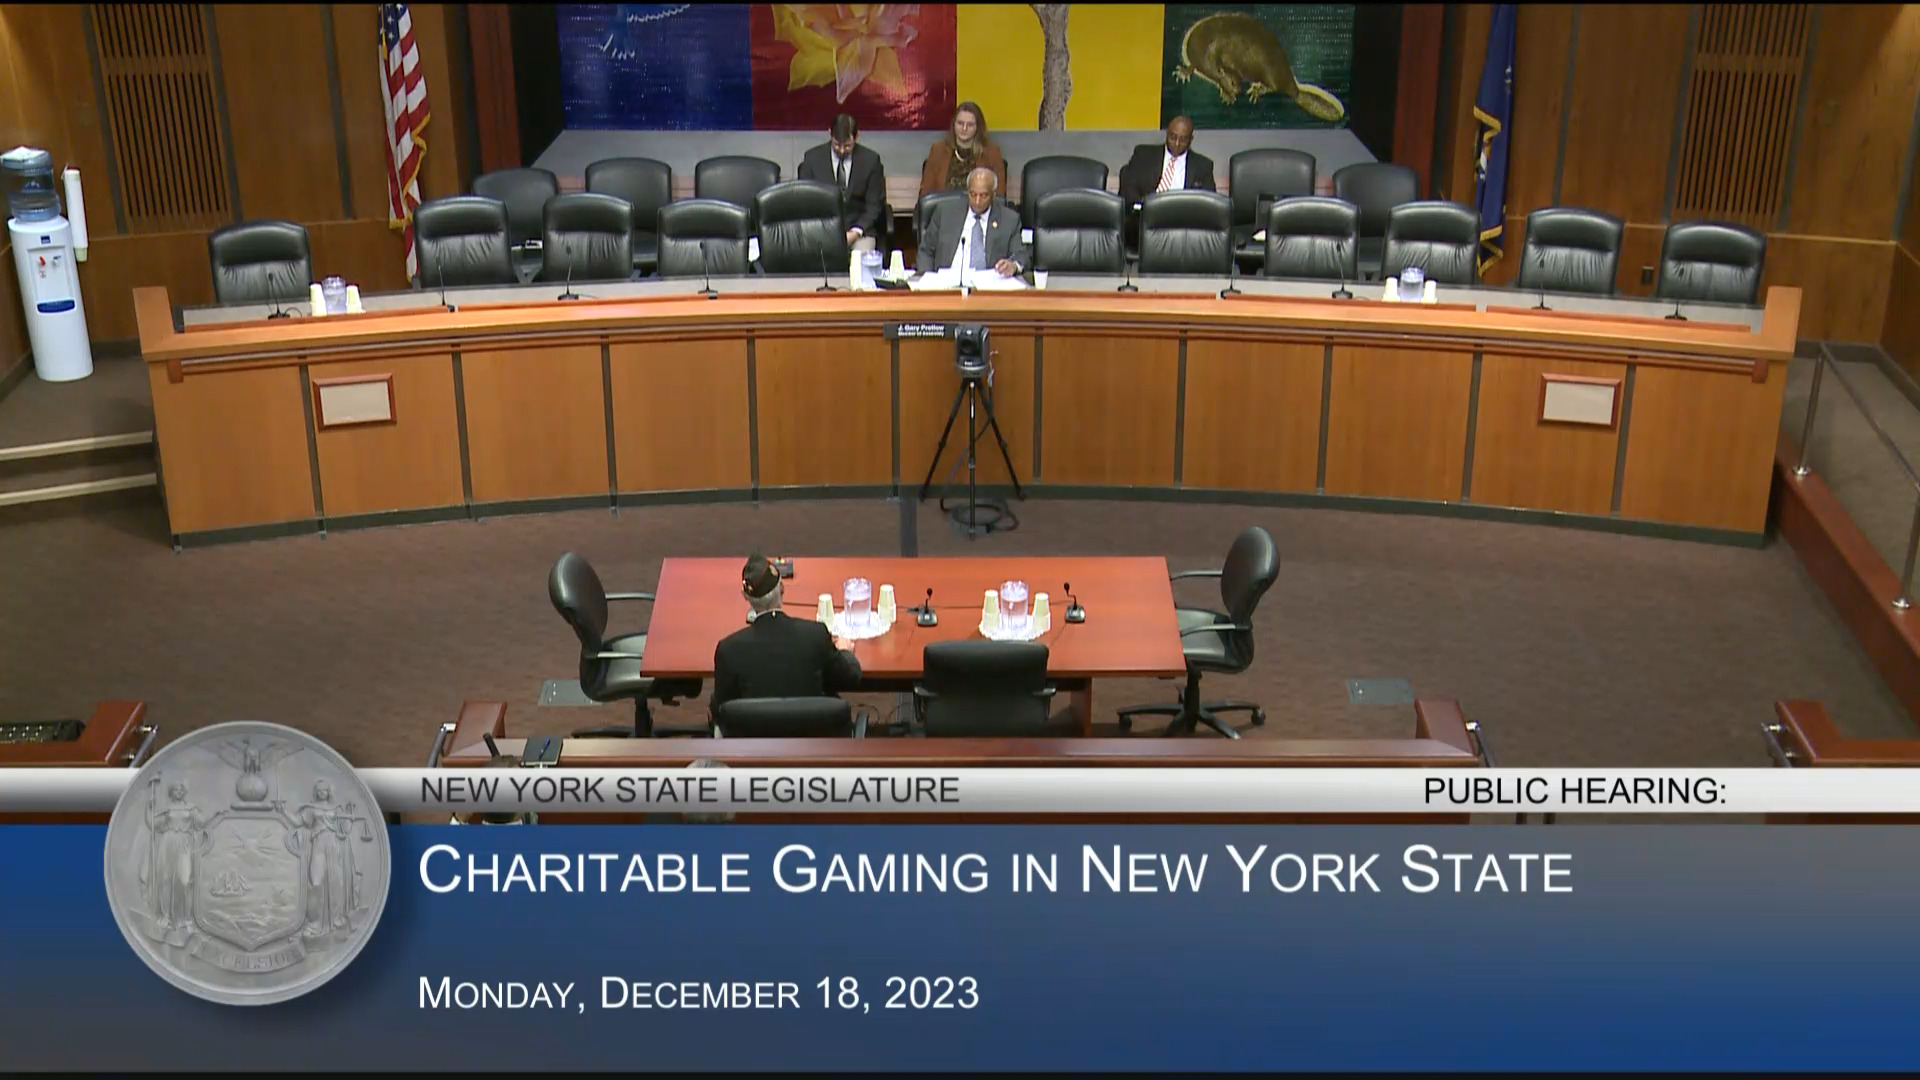 VFW State Commander Testifies During a Public Hearing on Charitable Gaming